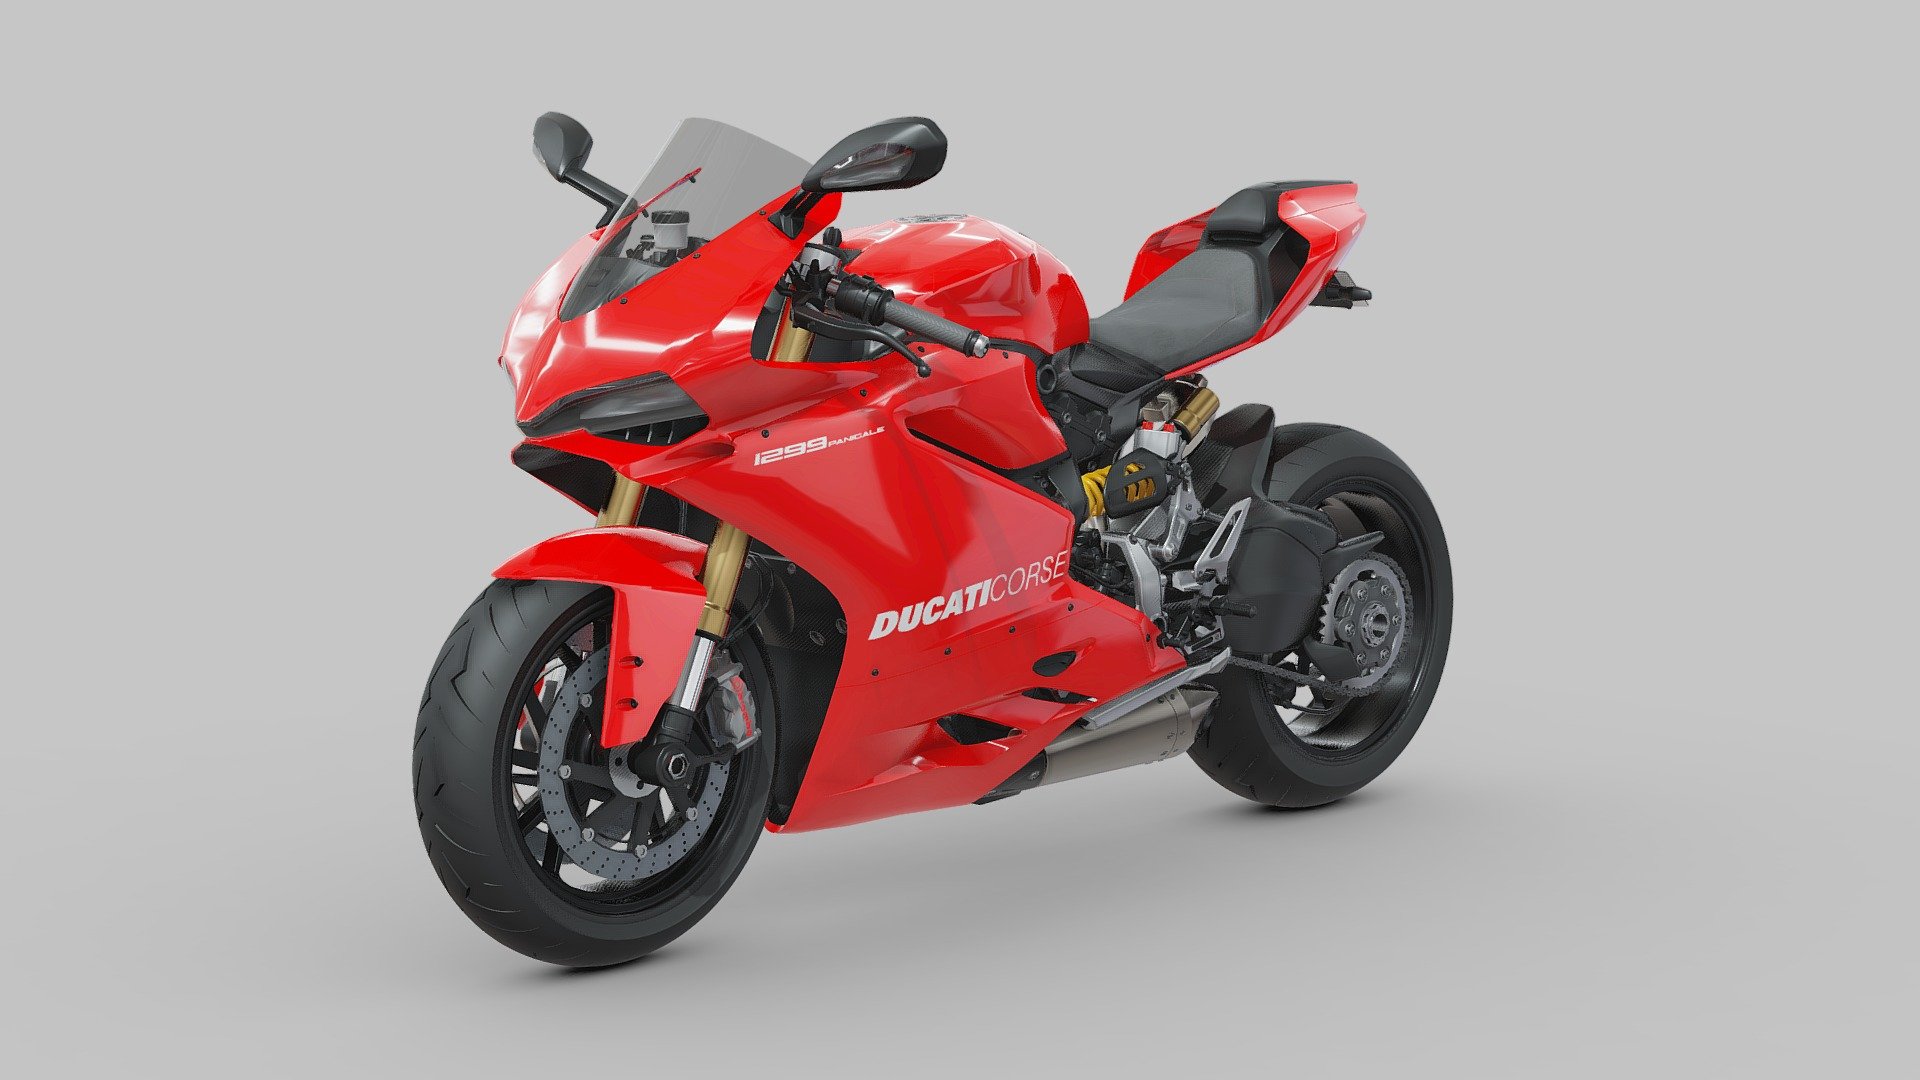 The 2015 Ducati Panigale 1299 marked a significant evolution in the Italian manufacturer's superbike lineup. Boasting a formidable combination of power, precision, and advanced technology, the Panigale 1299 continued Ducati's legacy of high-performance motorcycles. Underneath its sleek and aggressive fairings, the Panigale 1299 housed a powerful 1,285cc Superquadro engine. This L-twin powerhouse delivered exhilarating performance with an impressive balance of torque and horsepower. The addition of features like Ducati's innovative &ldquo;Superquadro